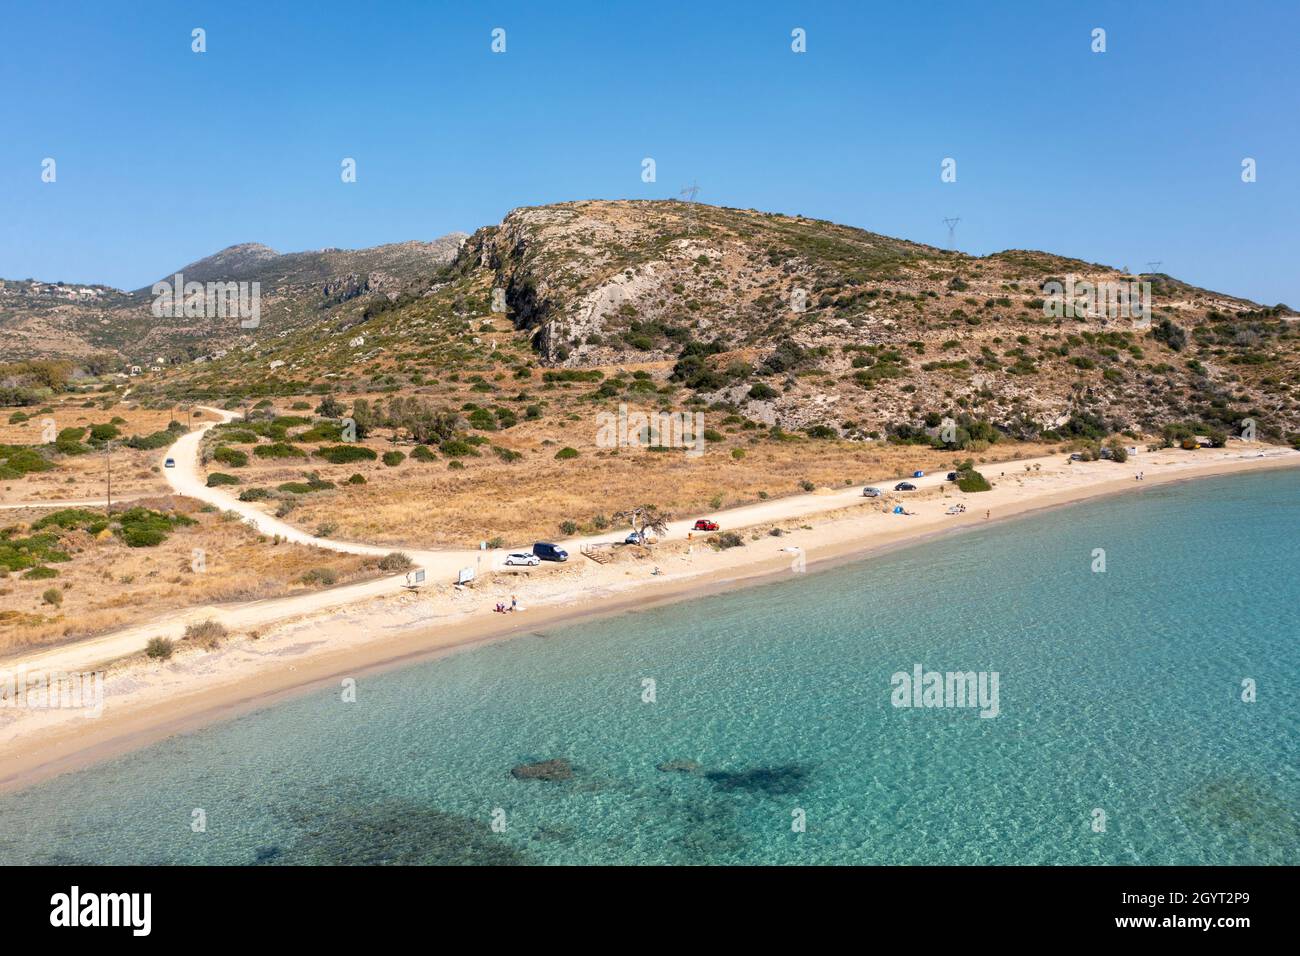 Aerial landscape view of a beach (Paralia Katelios) on the south coast of Kefalonia, Ionian Islands, Greece Stock Photo